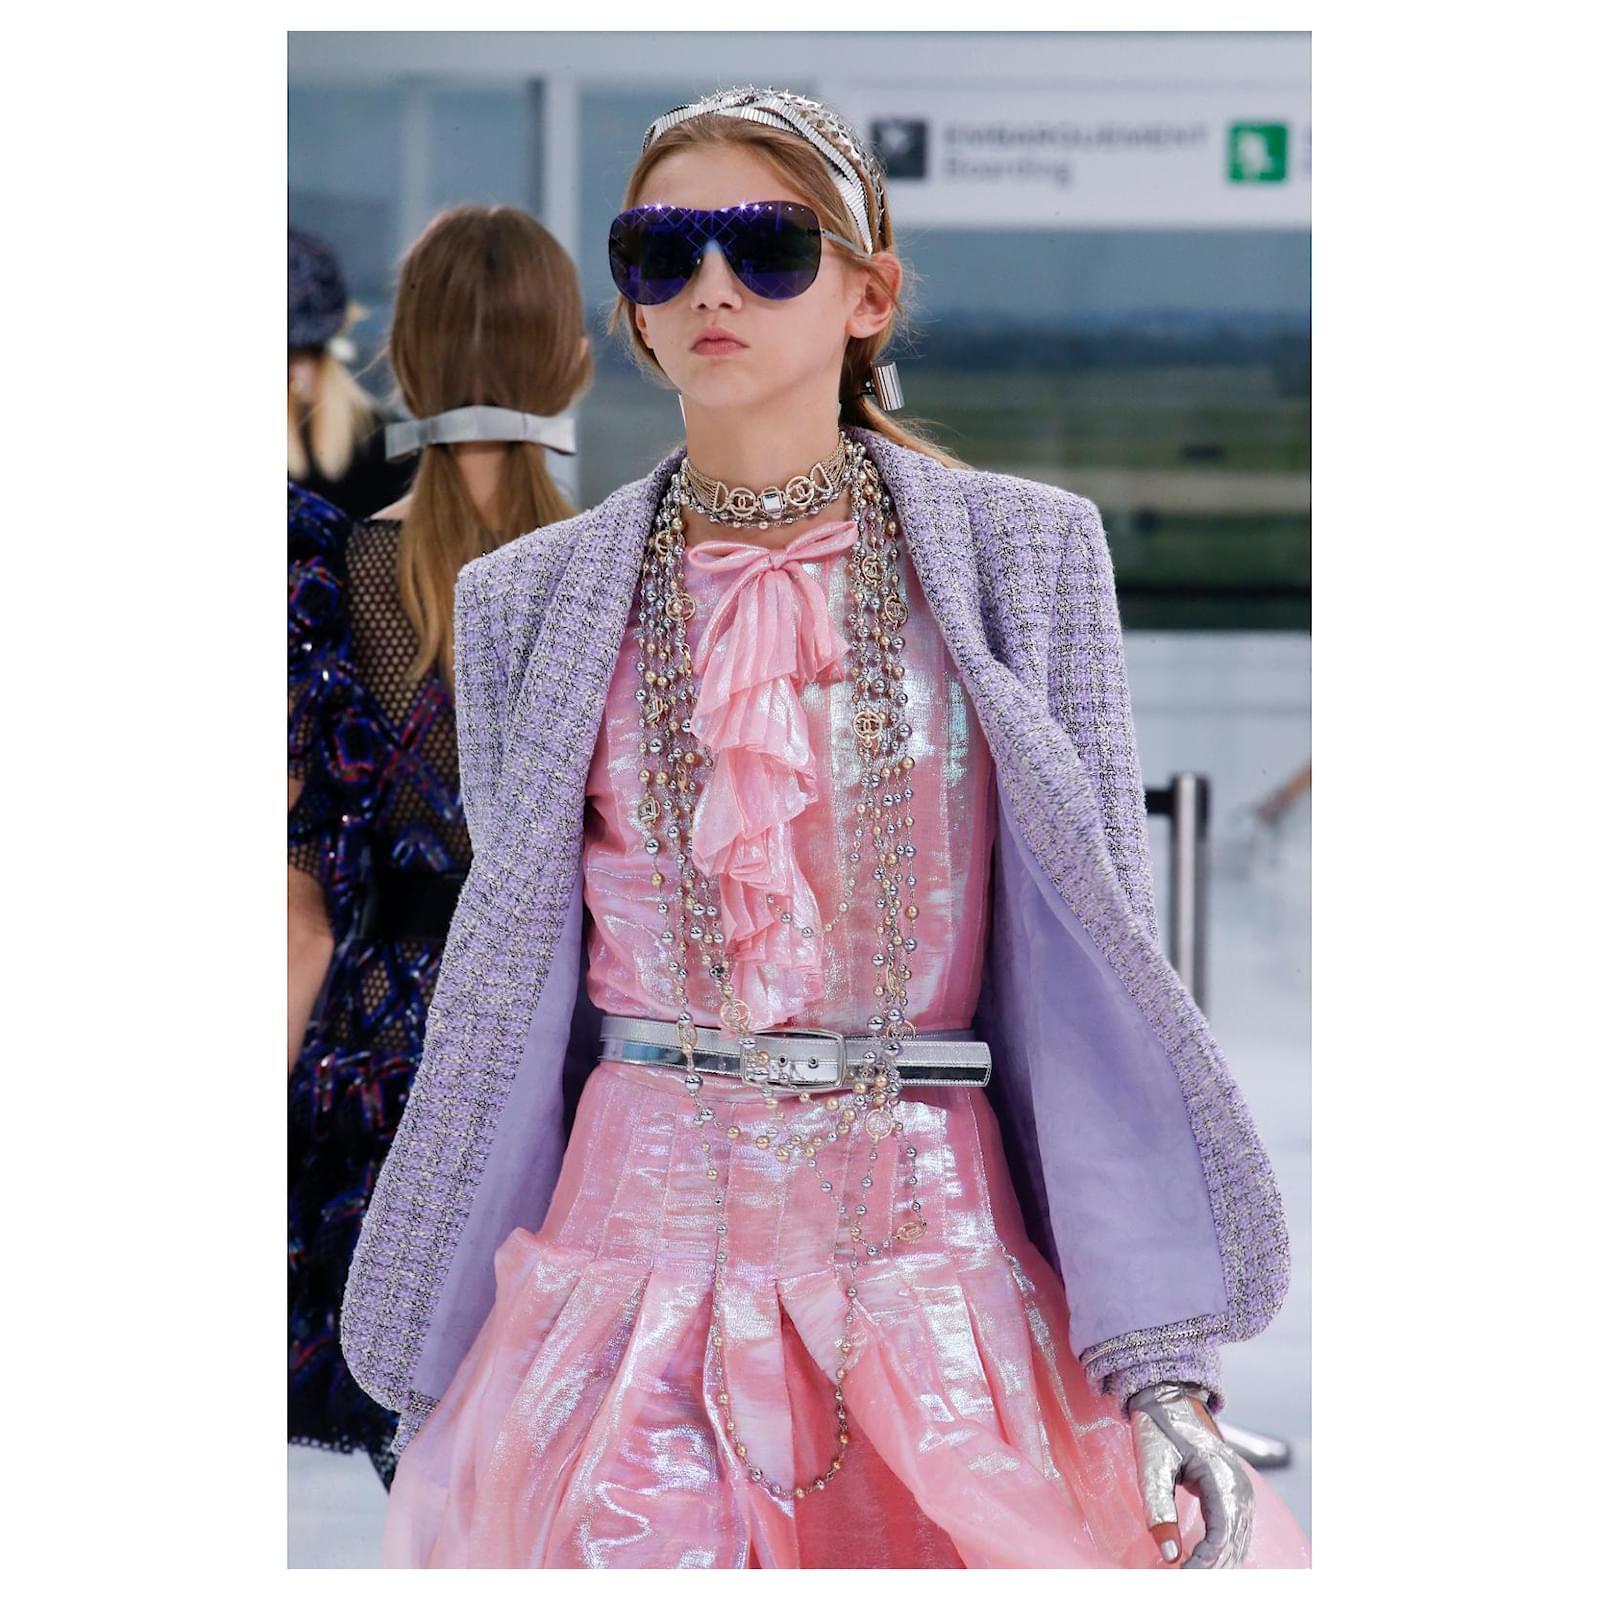 Chanel Airport Runway Lavender Tweed Jacket In Excellent Condition For Sale In Dubai, AE